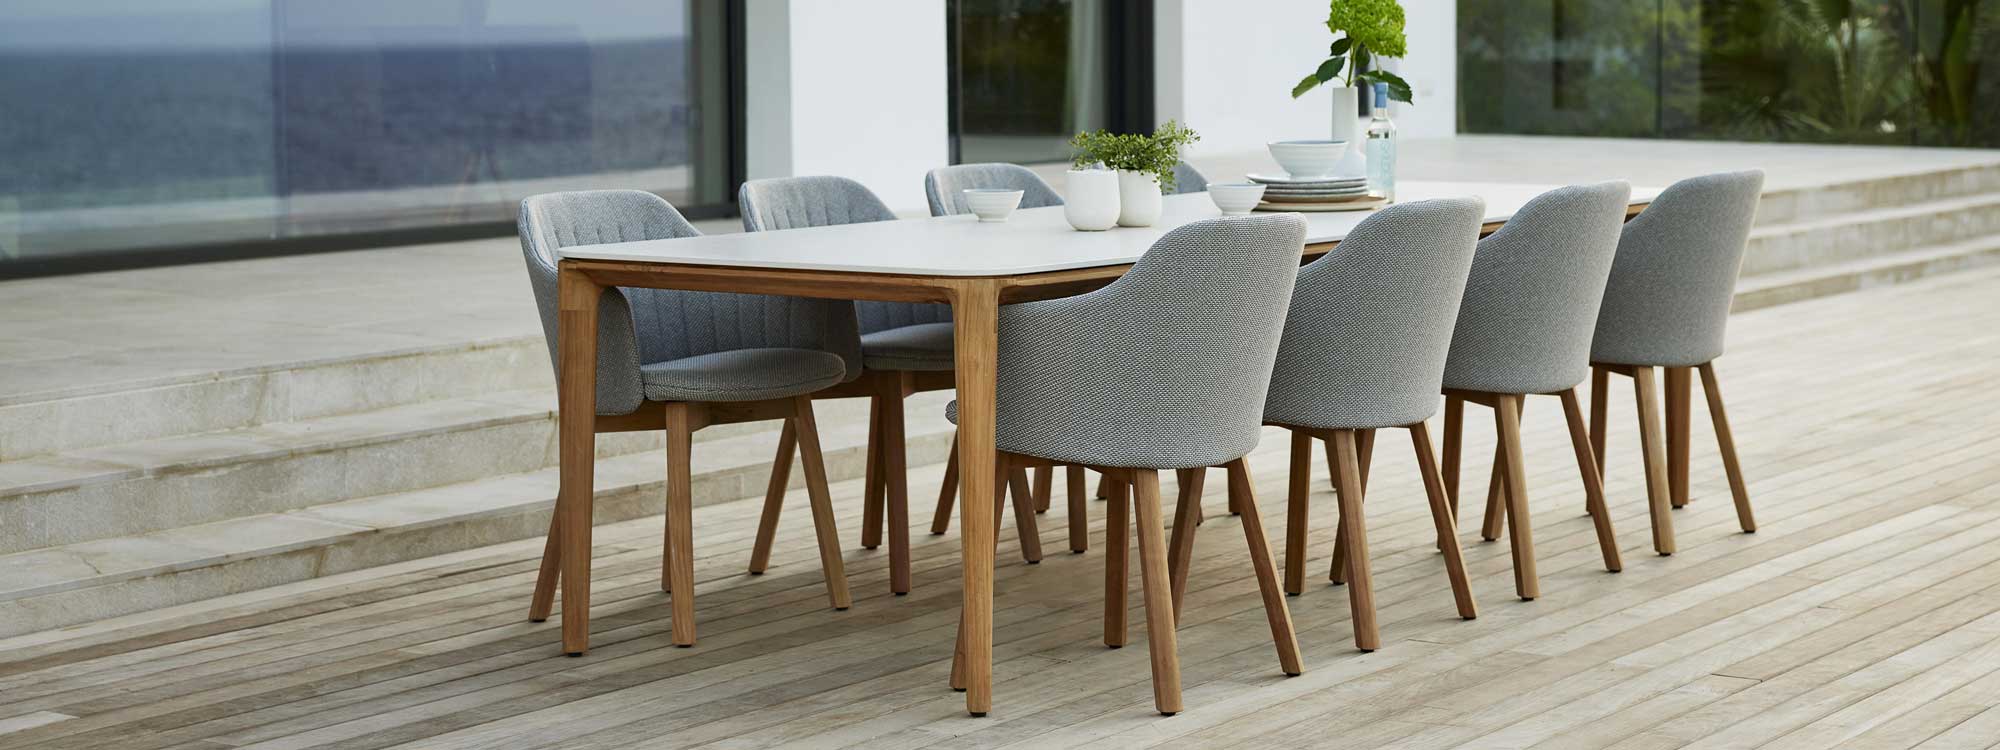 Image of Choice teak garden chairs with light-grey seat and back upholstery, together with Aspect teak table with Travertine ceramic top by Cane-line